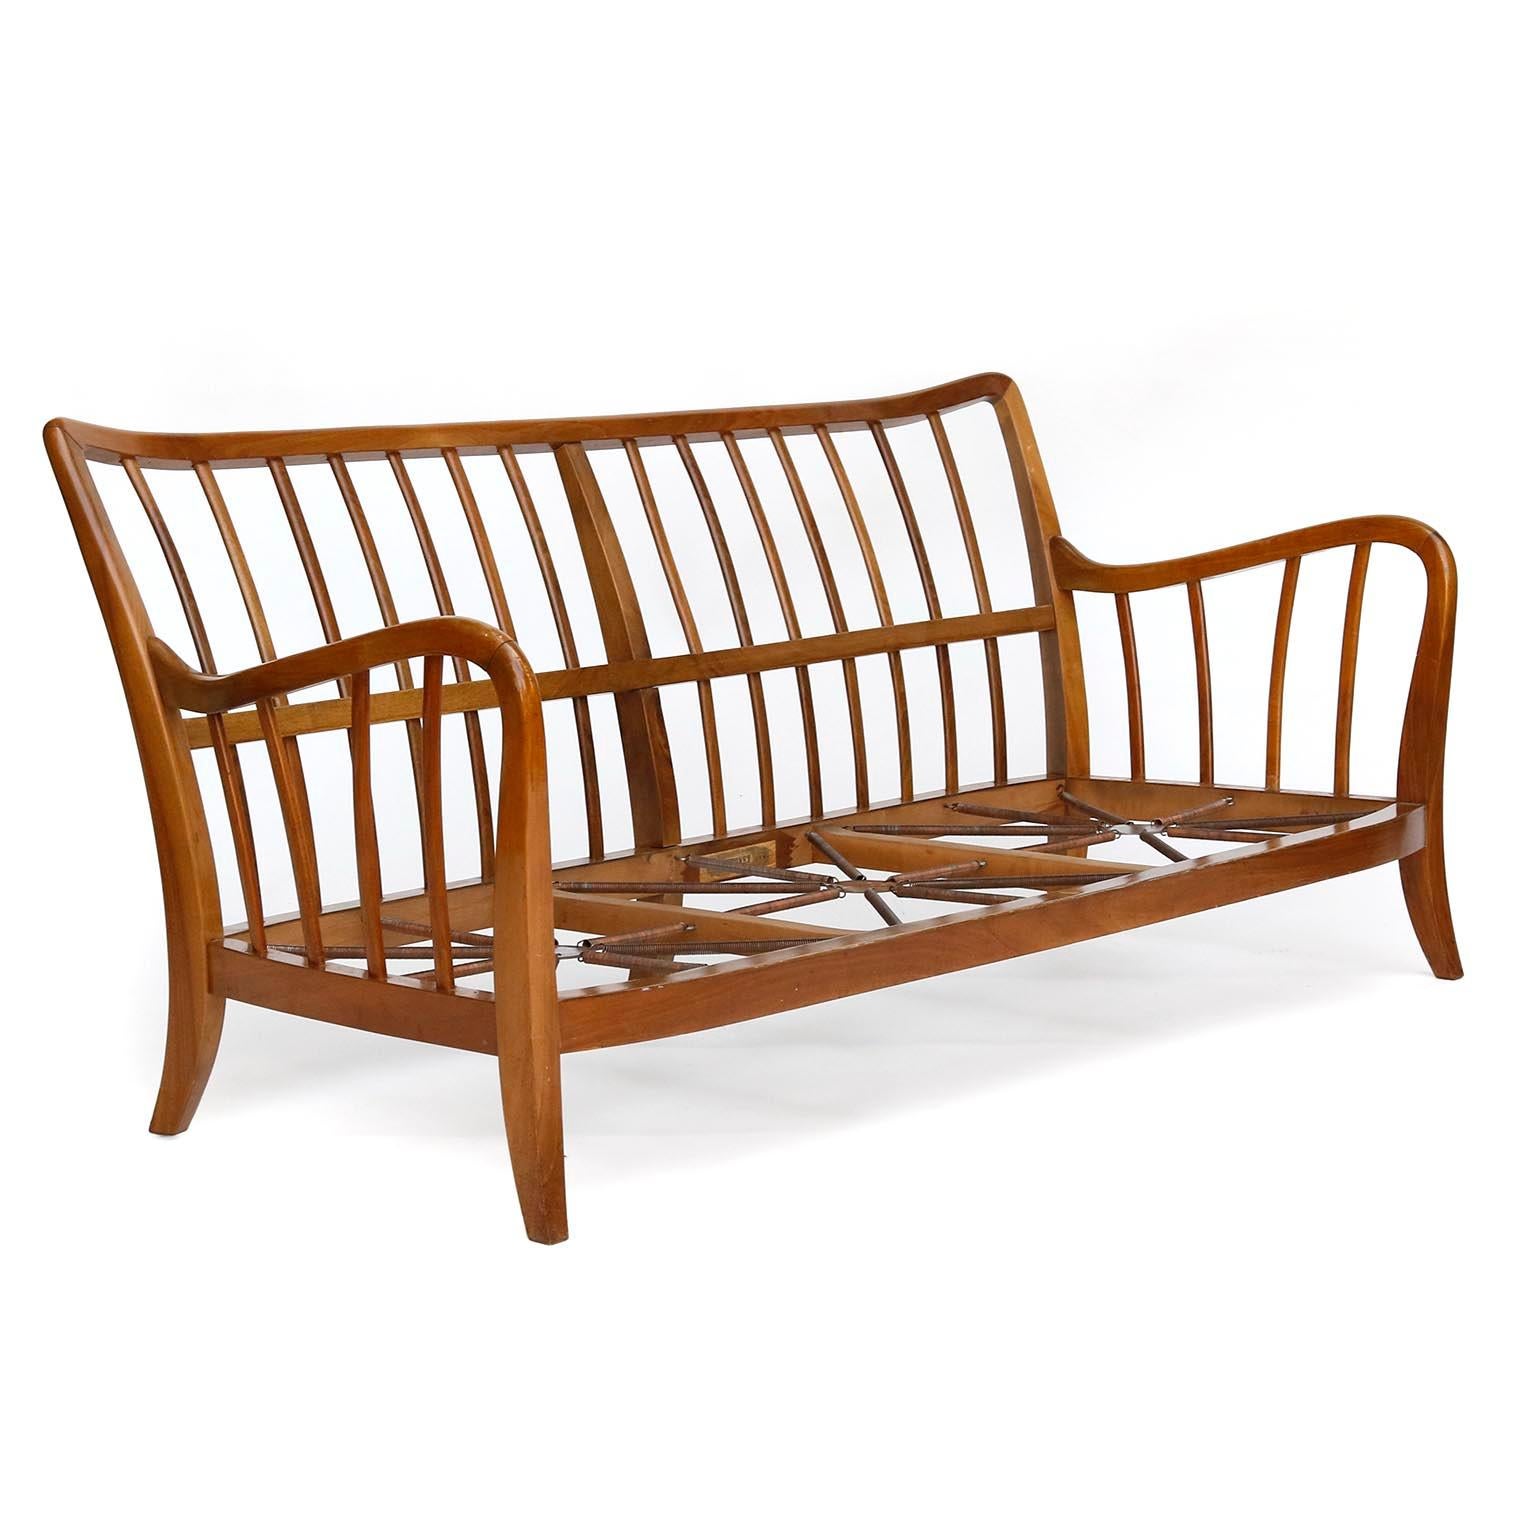 Mid-20th Century Seette Bench Seat Attributed to Josef Frank, Walnut Wood, Thonet, 1940